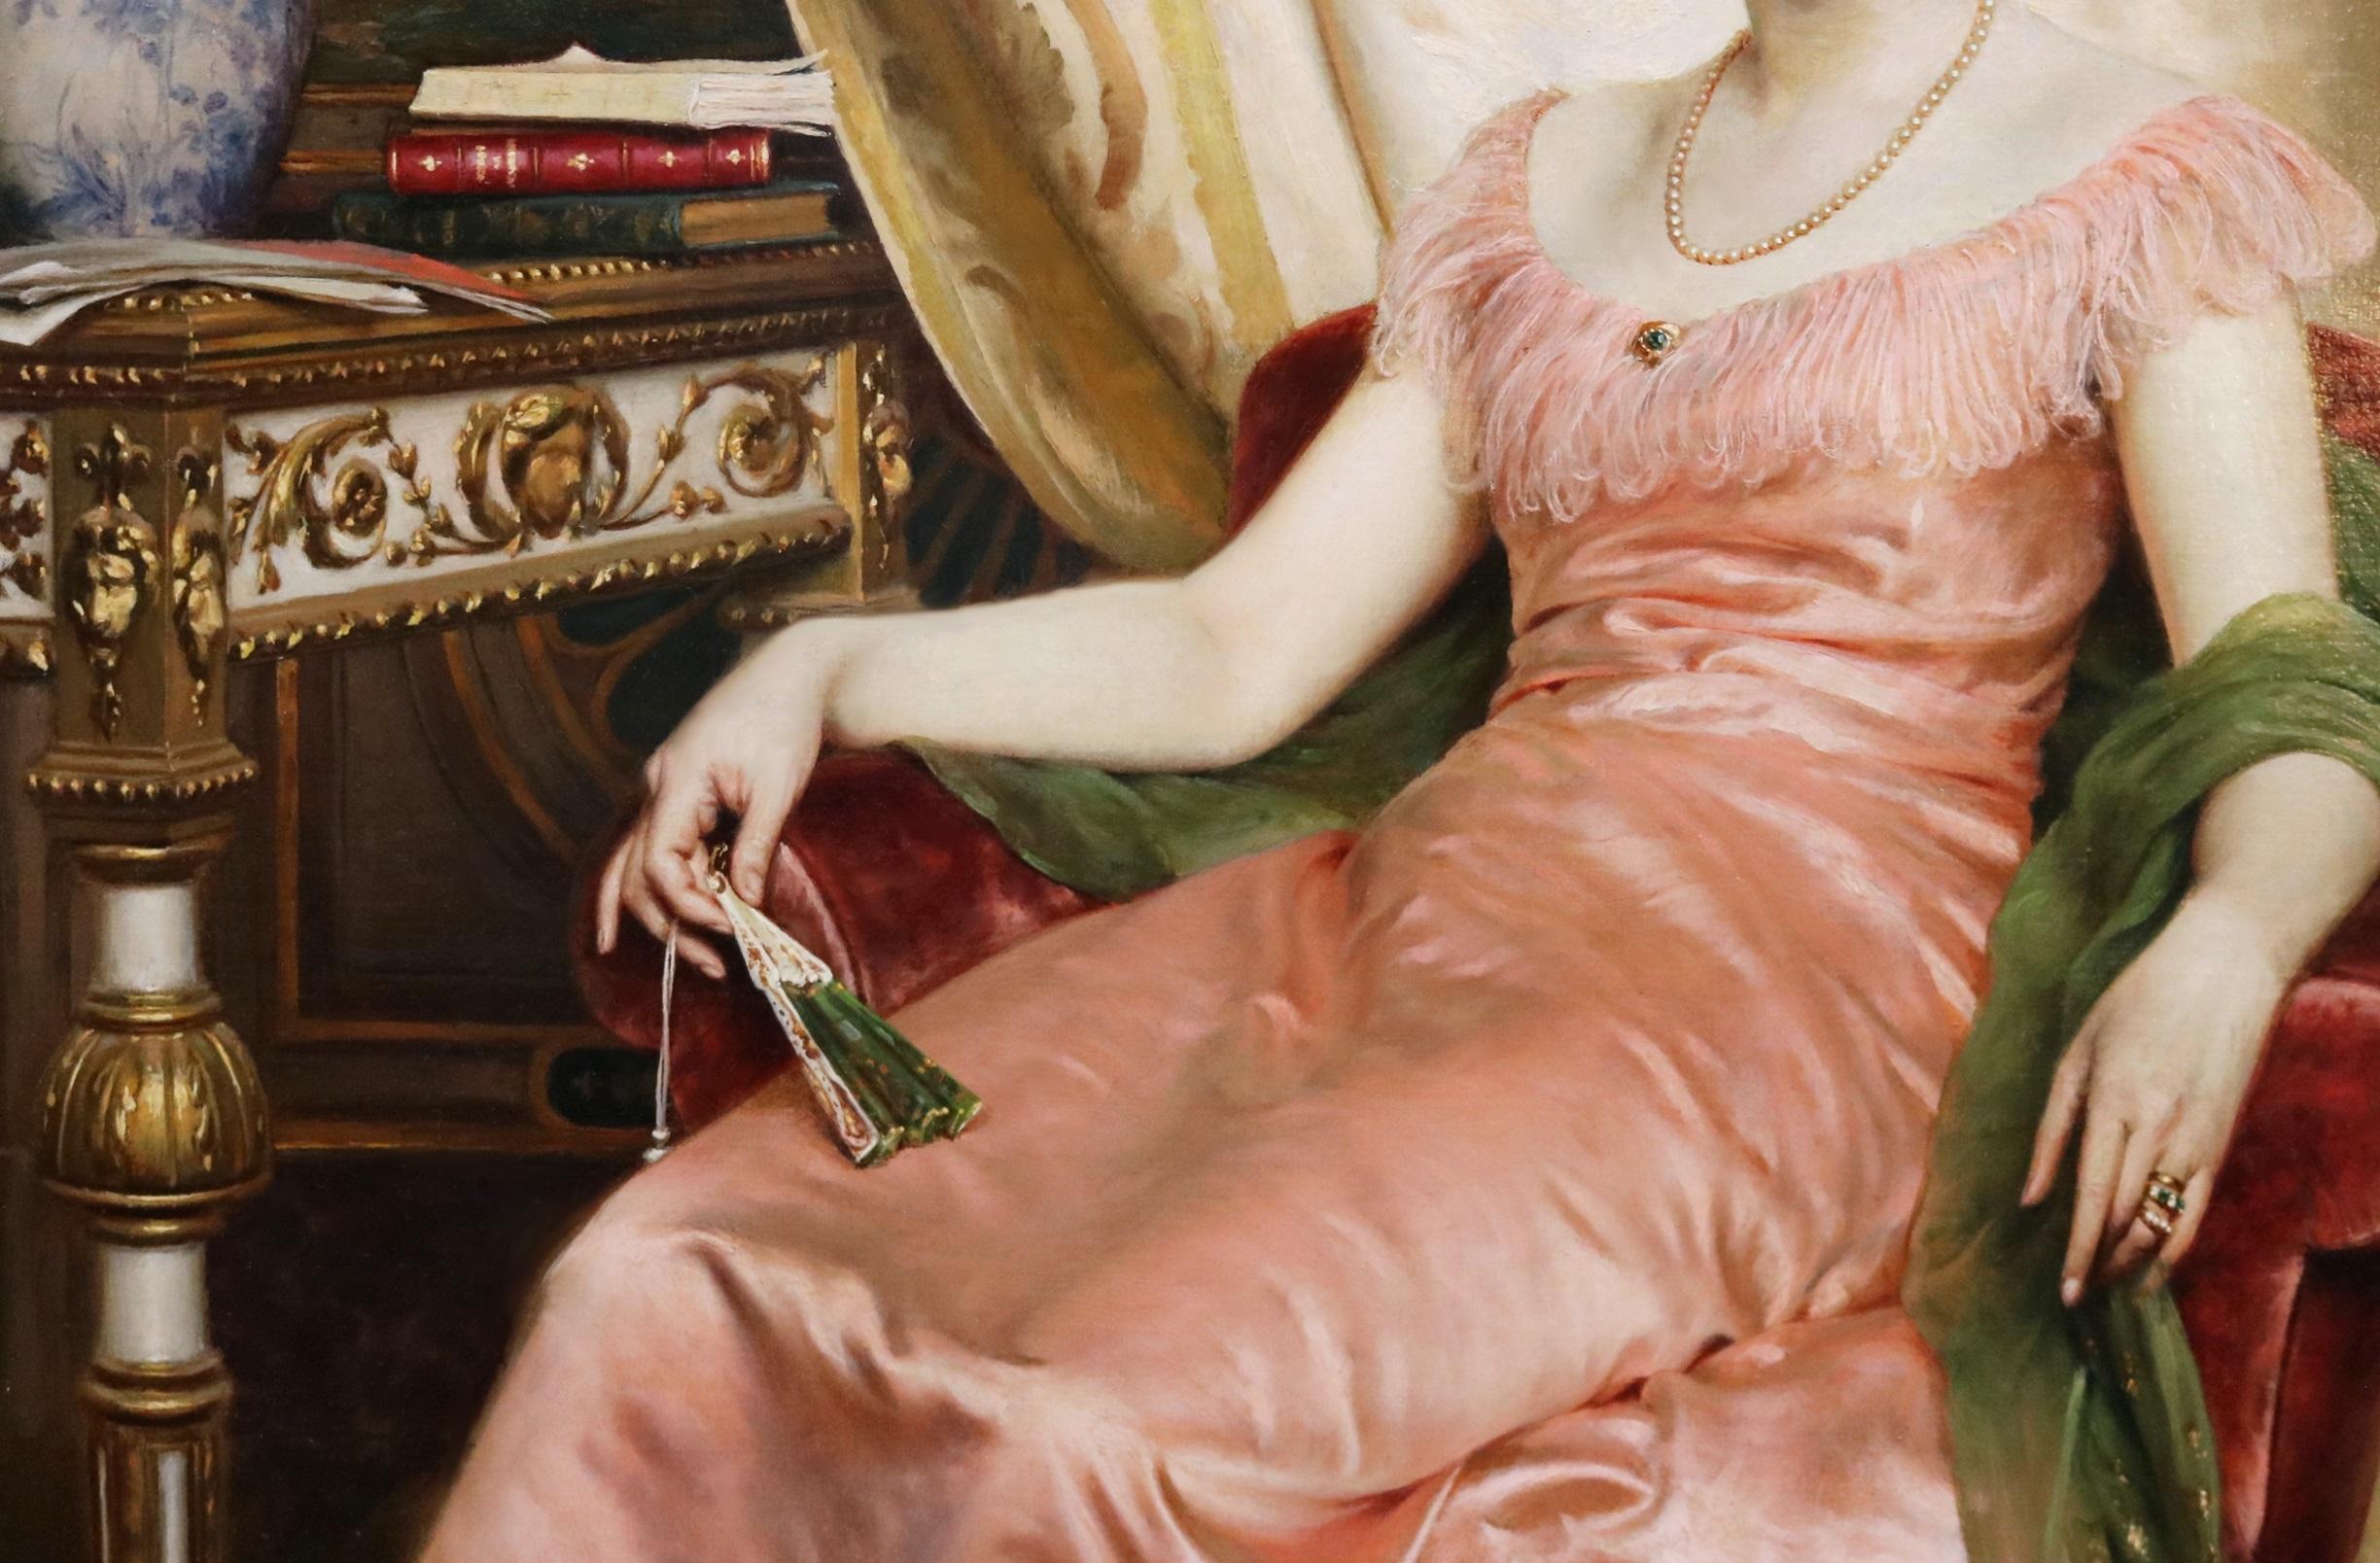 ‘Regina dei Fiori’ by Frédéric Soulacroix (1858-1933). The painting – which depicts an aristocratic Italian beauty sitting beside a porcelain vase full of peonies – is signed by the artist and presented in a superb quality hand-carved giltwood